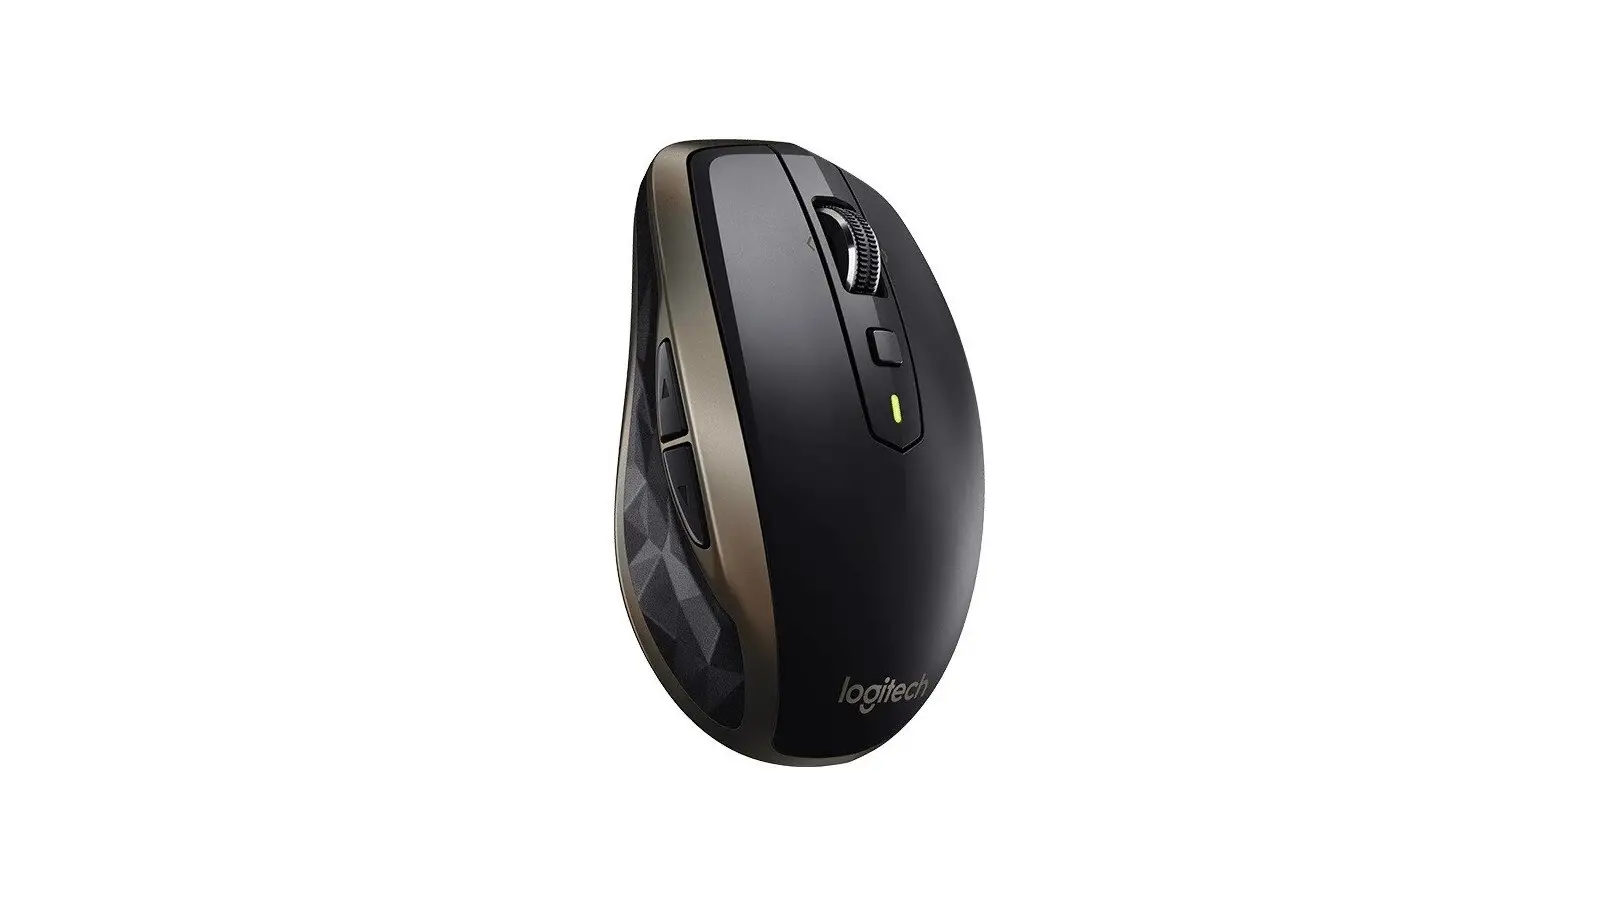 MXANYWHERE2 Wireless Mobile Mouse